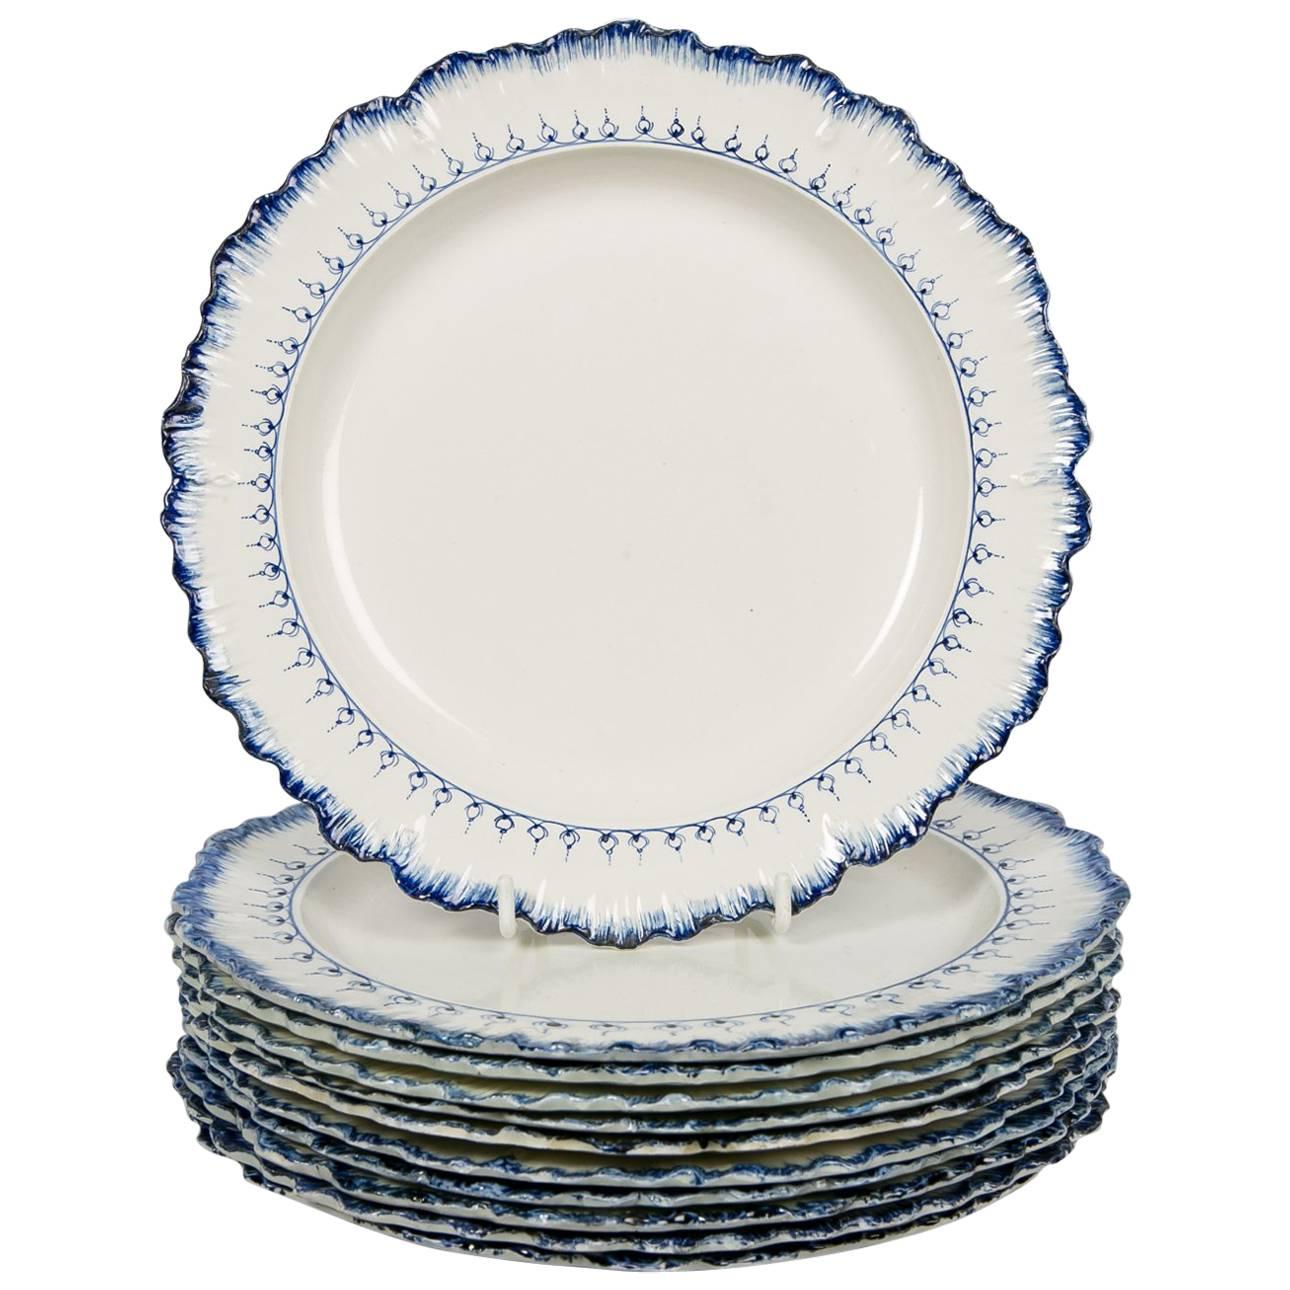 Set of 10 Wedgwood Blue and White Antique Dishes